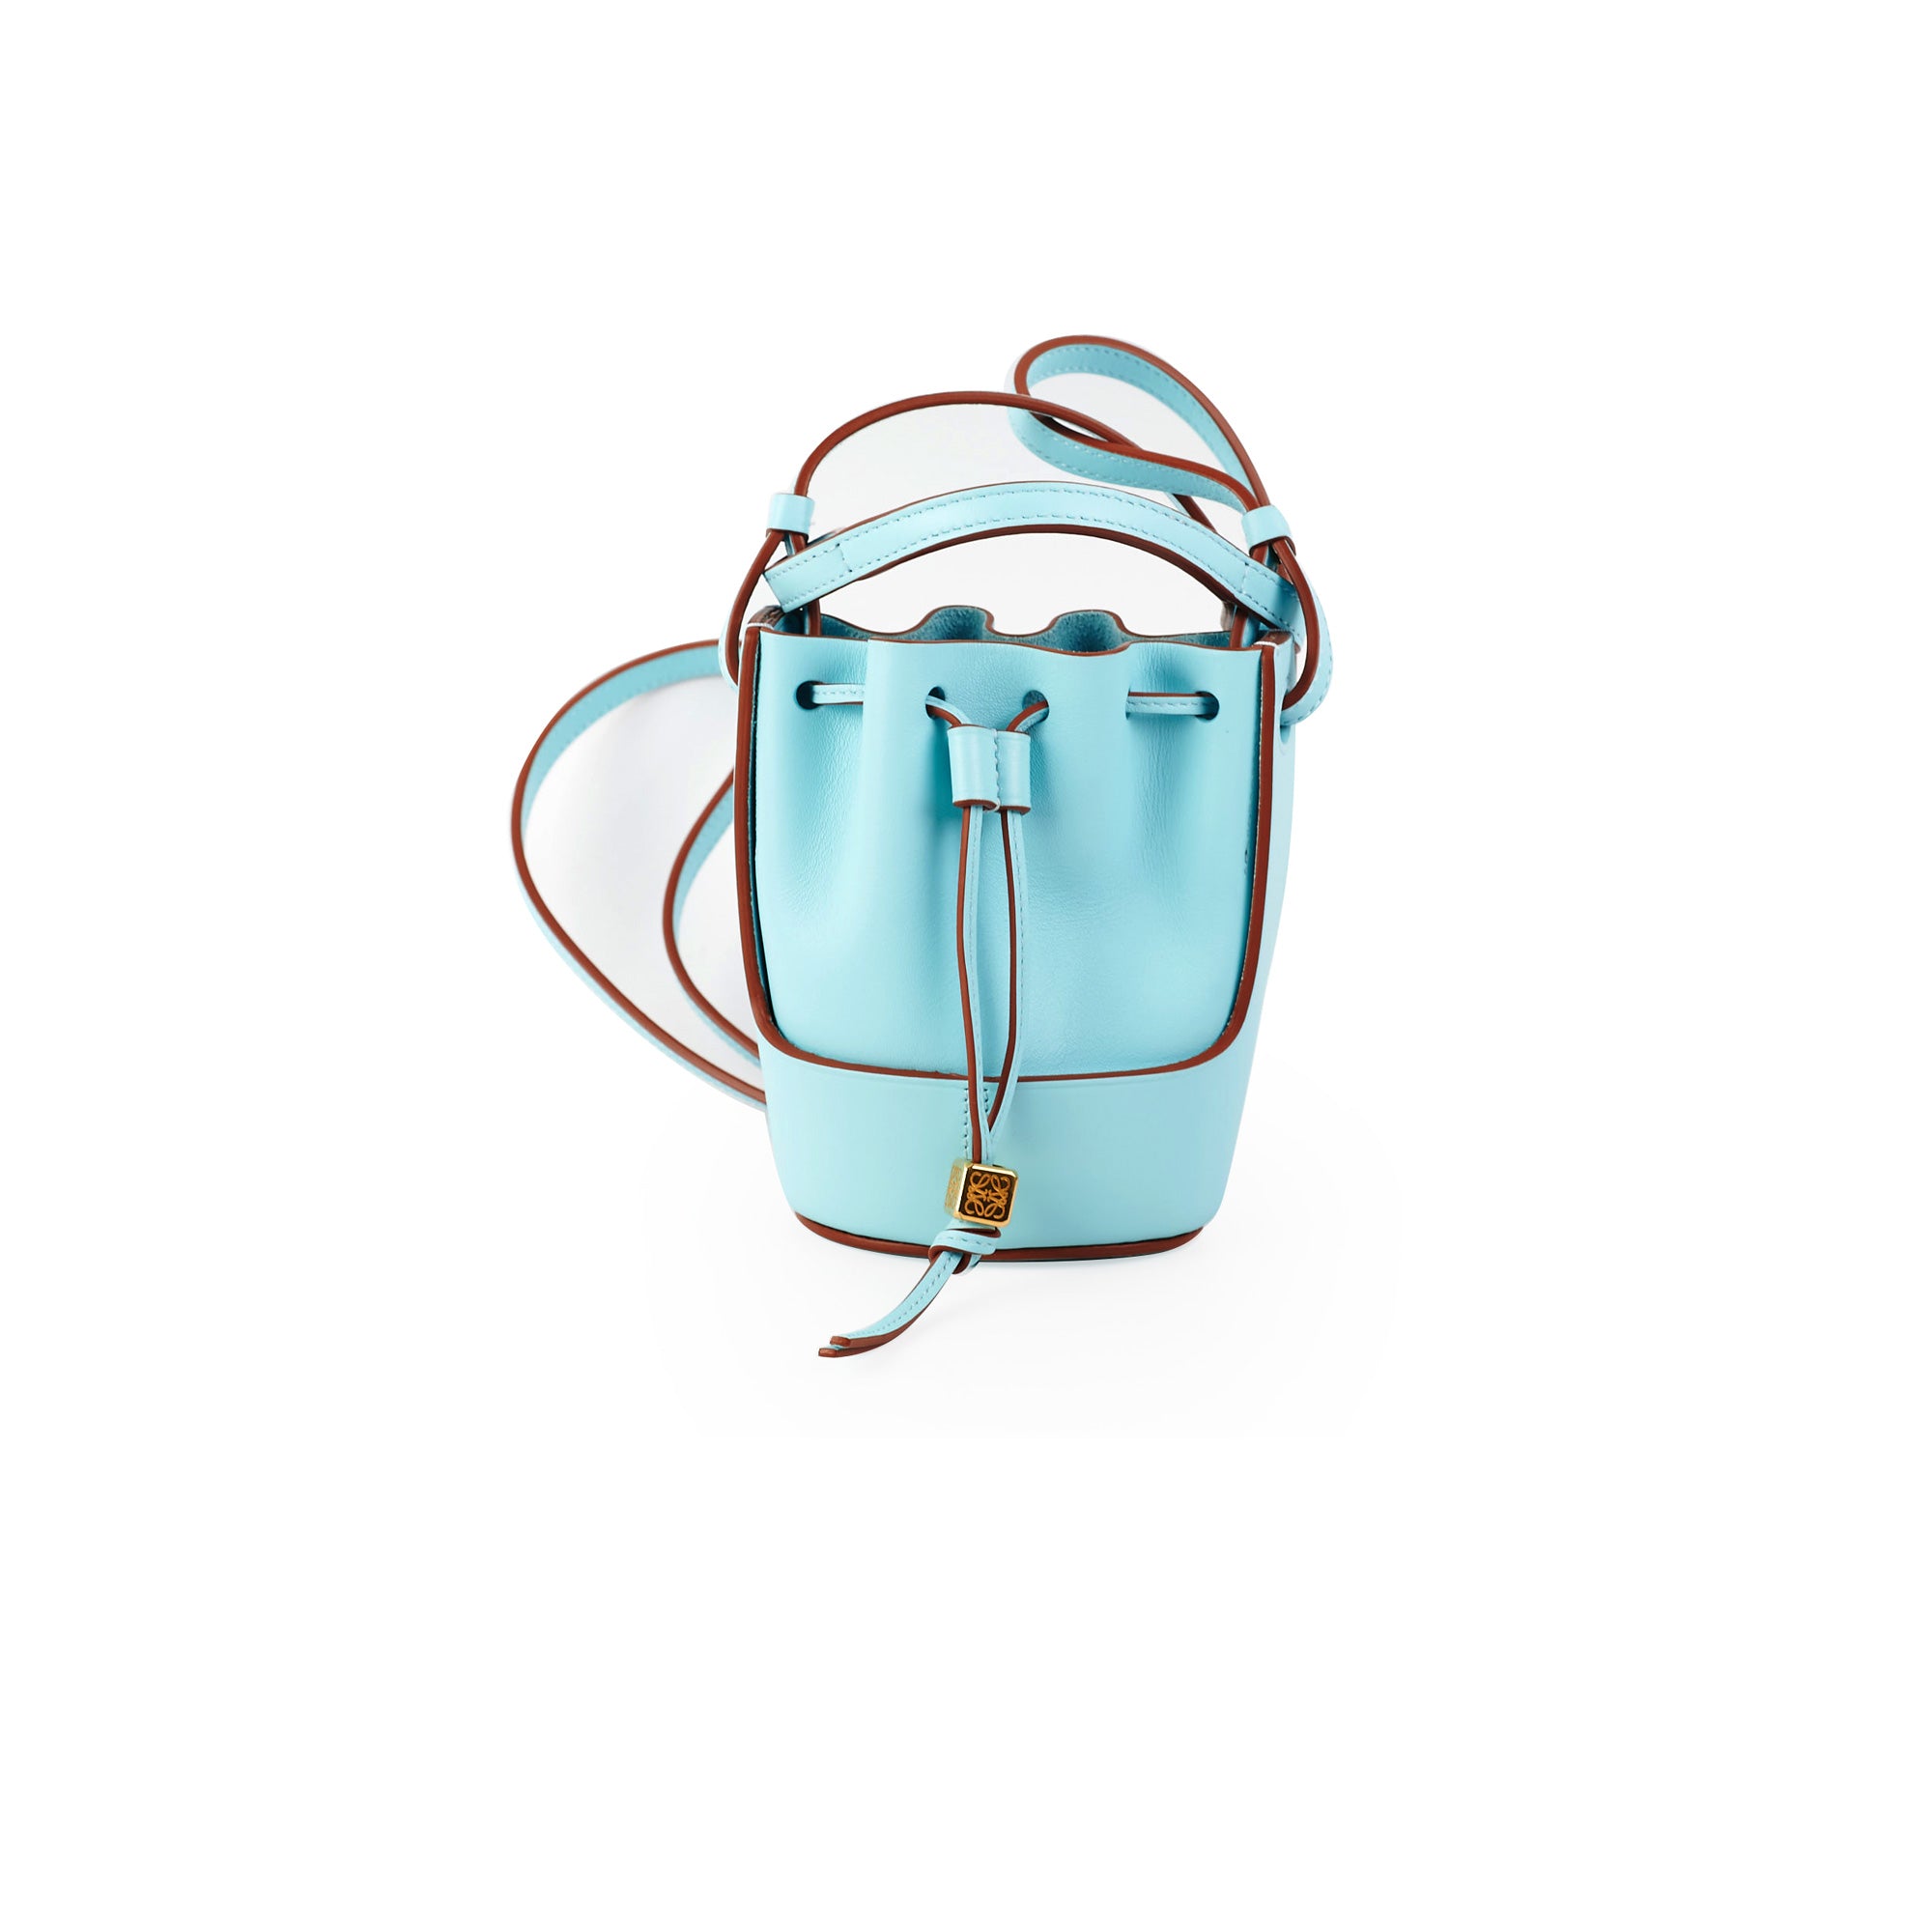 LOEWE - Introducing the nano Balloon bag. The newest member of our